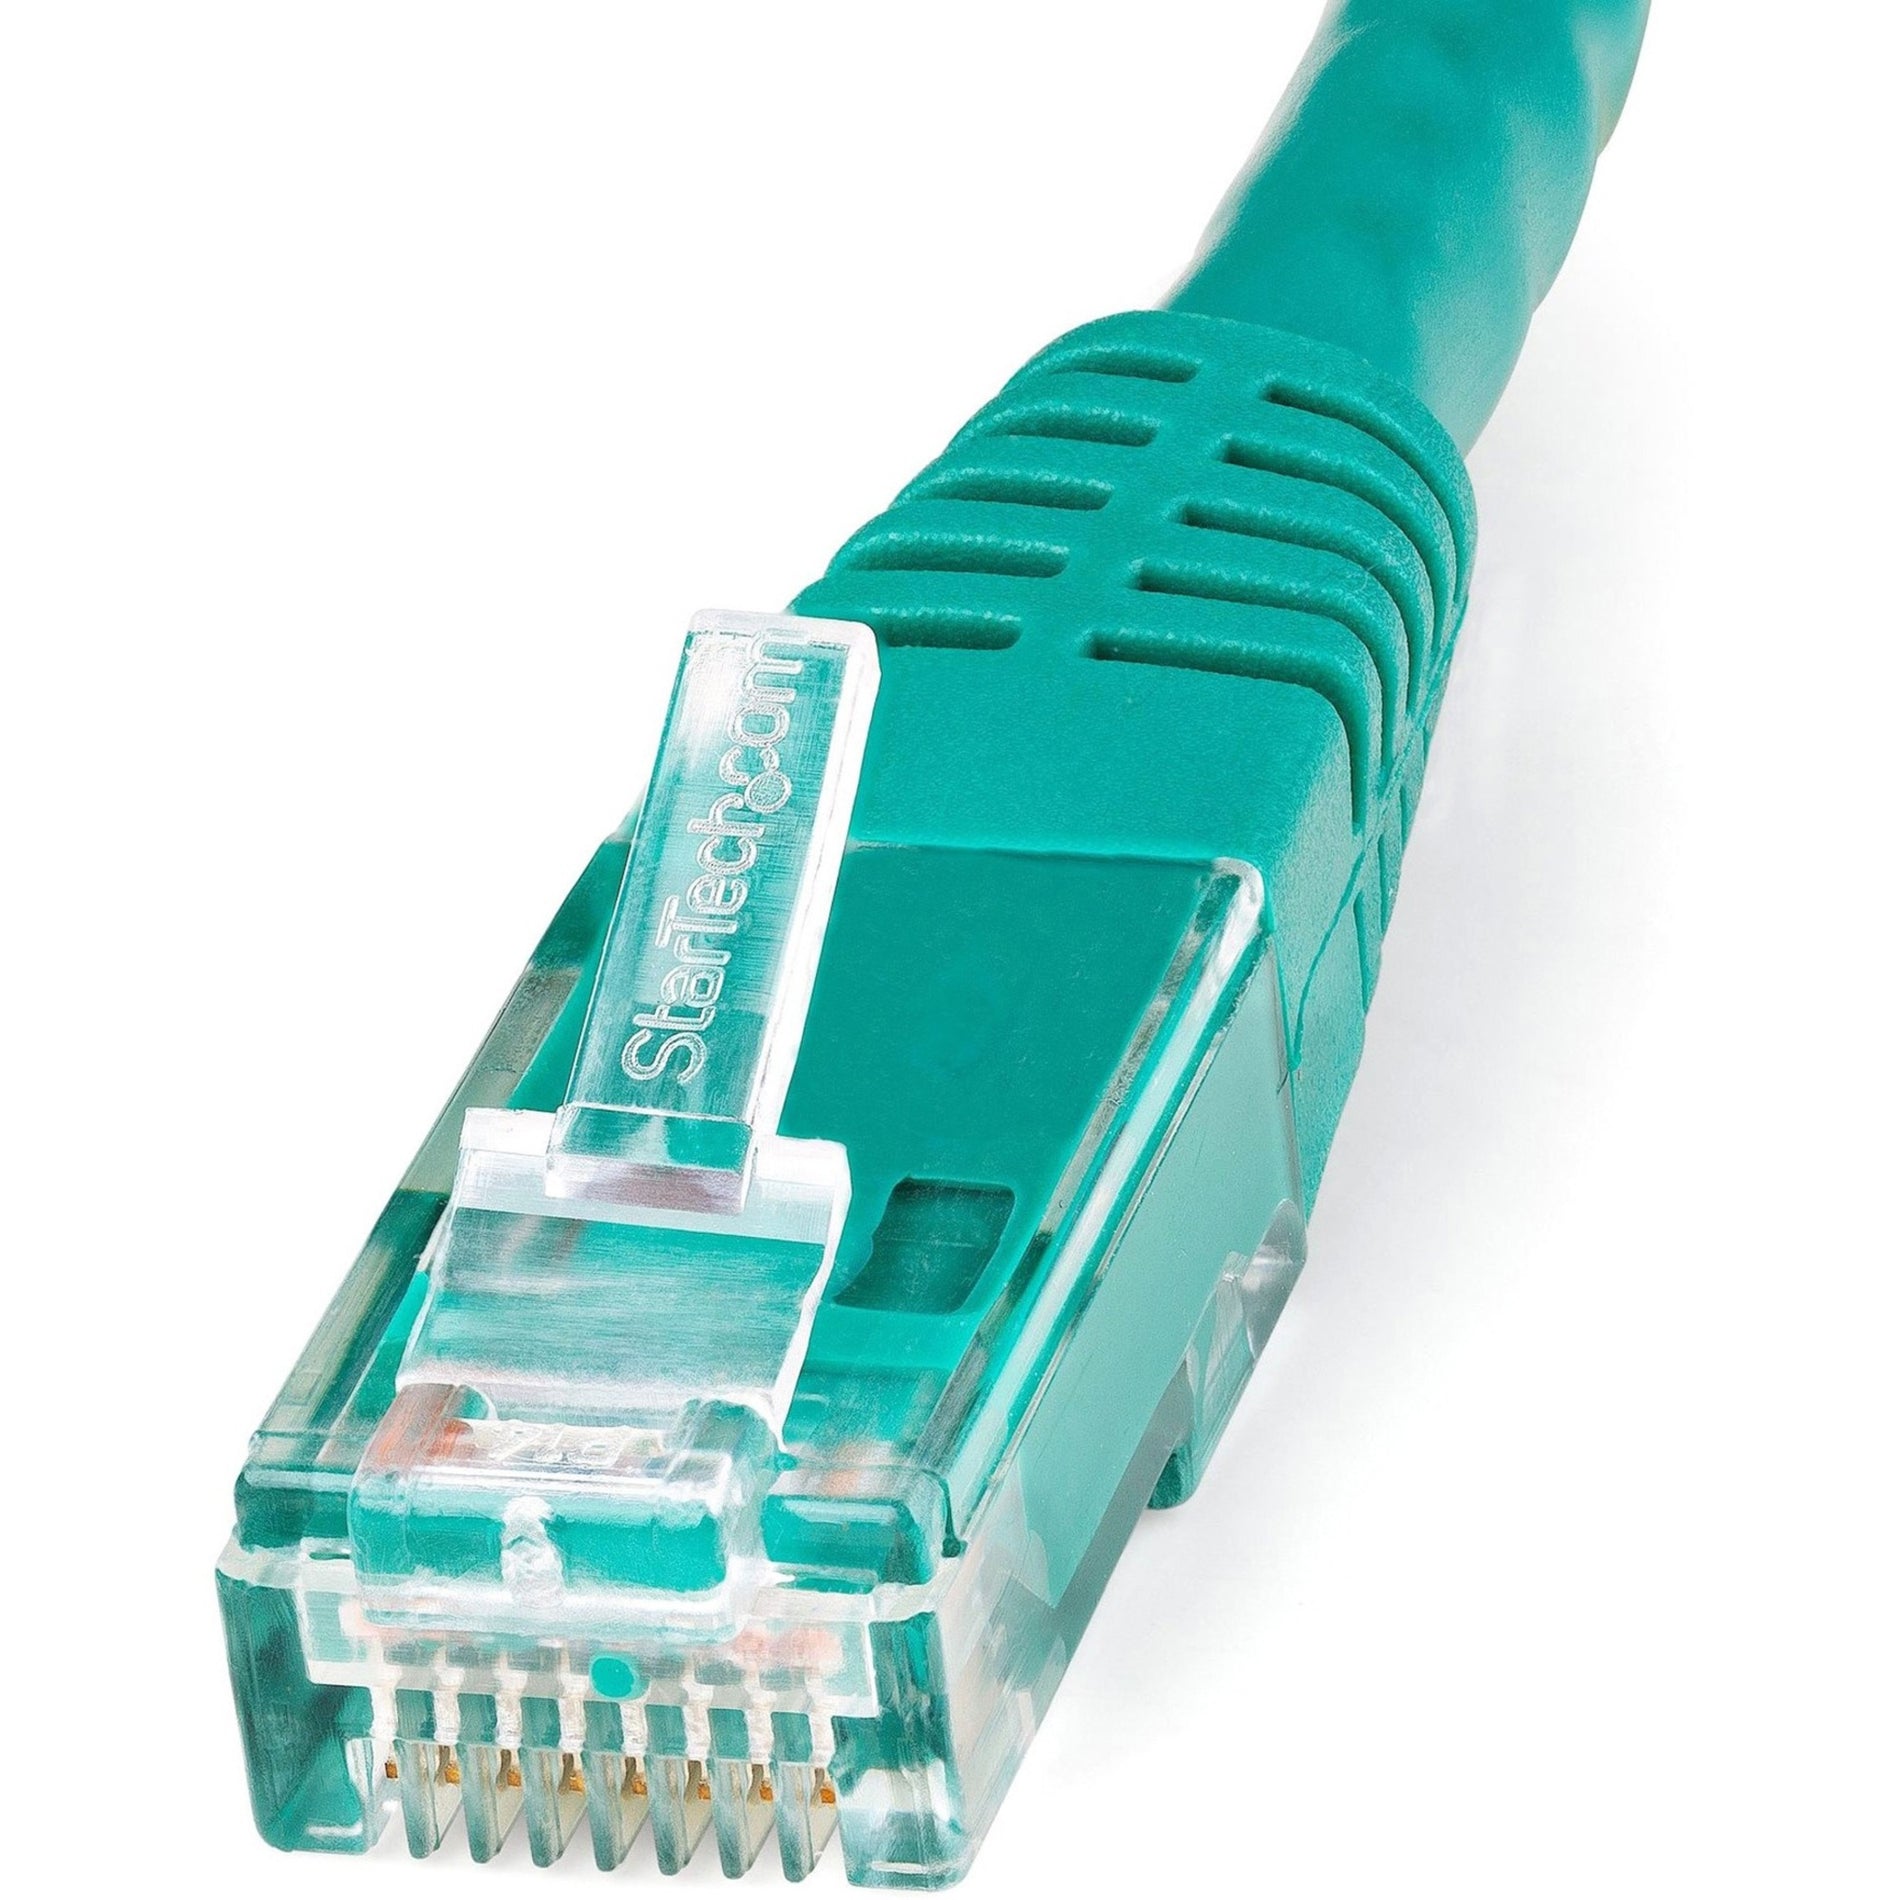 StarTech.com C6PATCH4GN 4ft Green Cat6 UTP Patch Cable ETL Verified, 10 Gbit/s Data Transfer Rate, Gold Plated Connectors